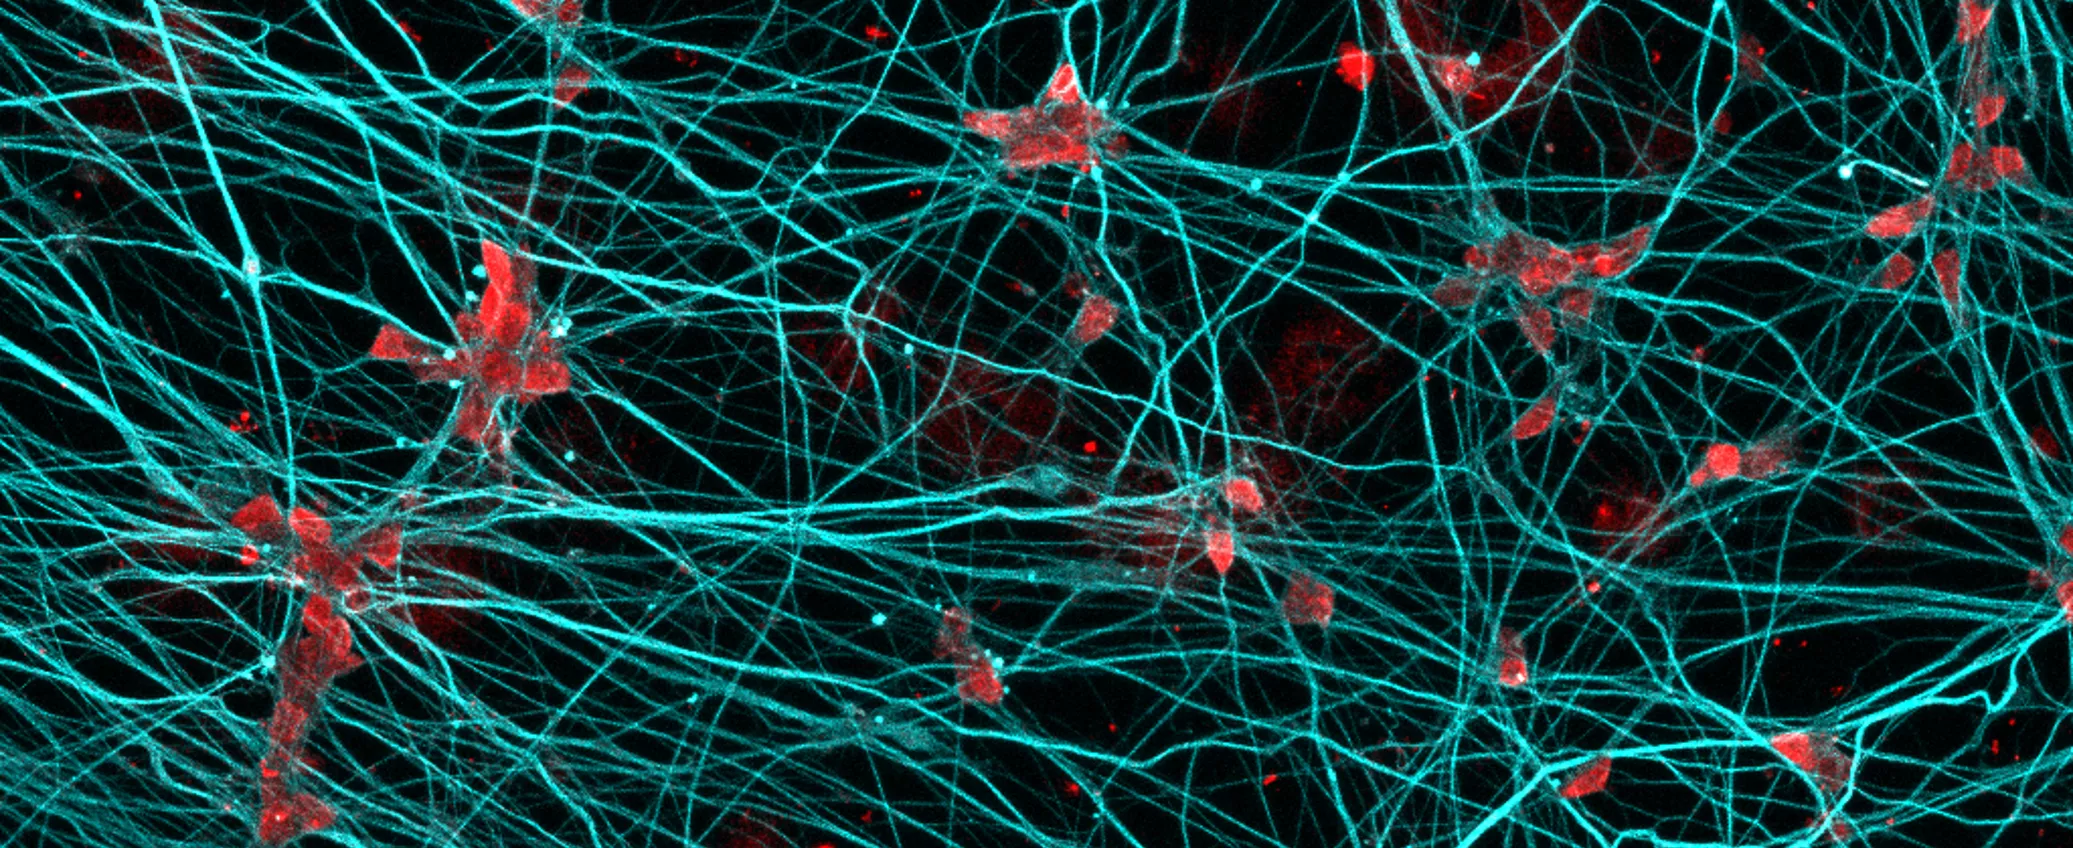 Motor neurons grown in a dish